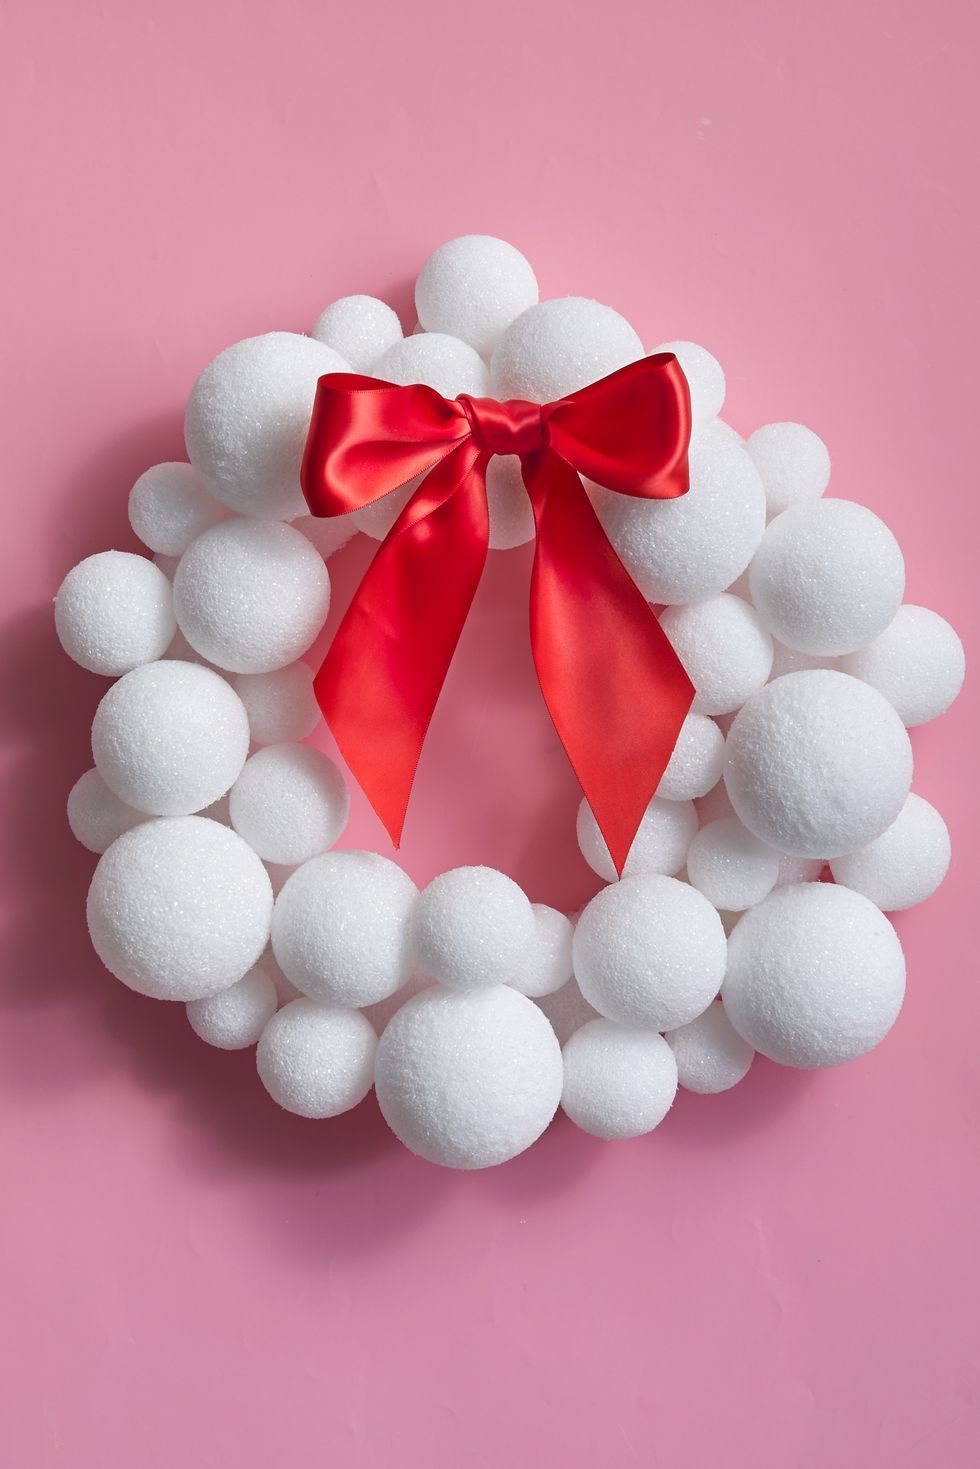 72 DIY Christmas Wreaths - How to Make a Holiday Wreath Craft